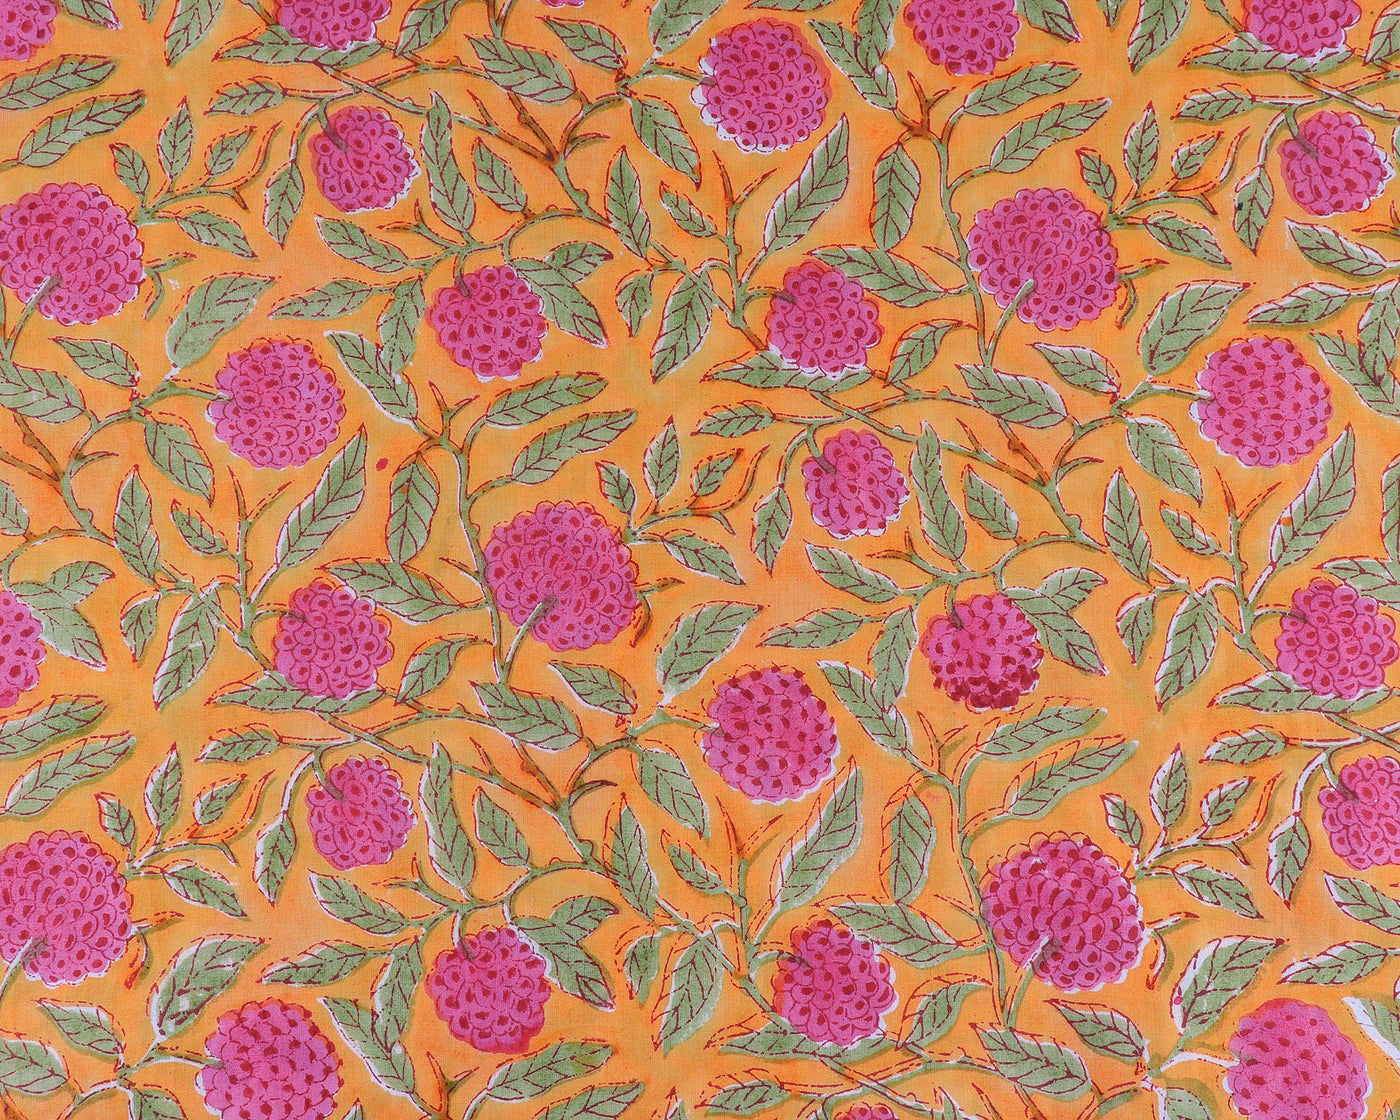 Fabricrush Amber Yellow, Rose Pink, Laurel Green Indian Floral Hand Block Printed Cotton Cloth, Fabric by yard, Women's clothing Curtains Duvet Cover